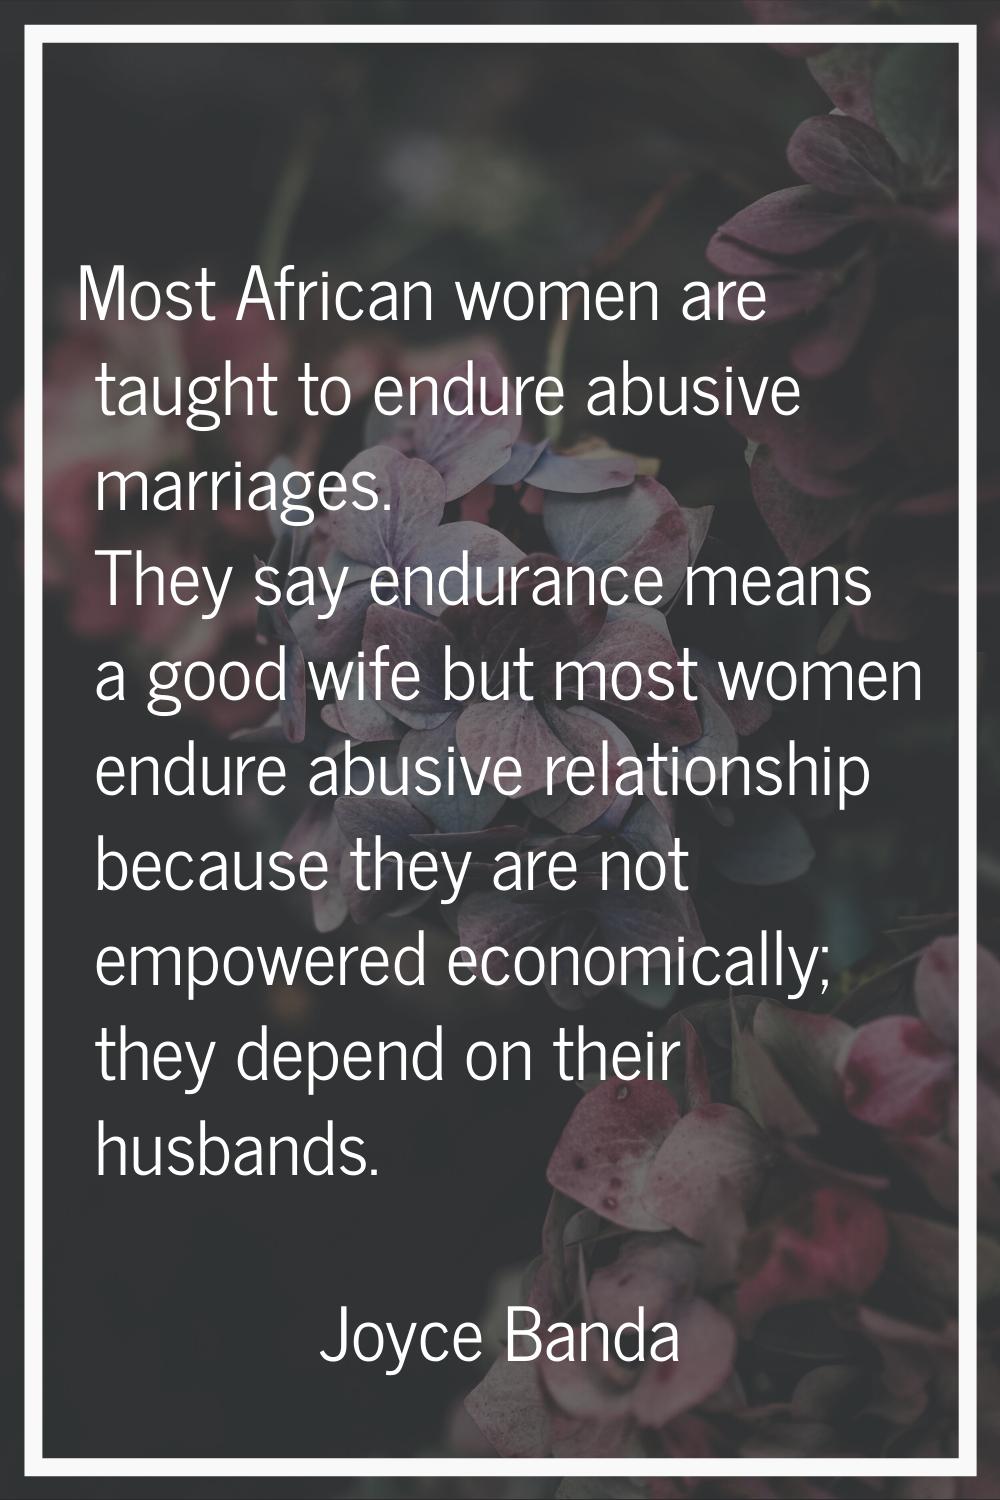 Most African women are taught to endure abusive marriages. They say endurance means a good wife but